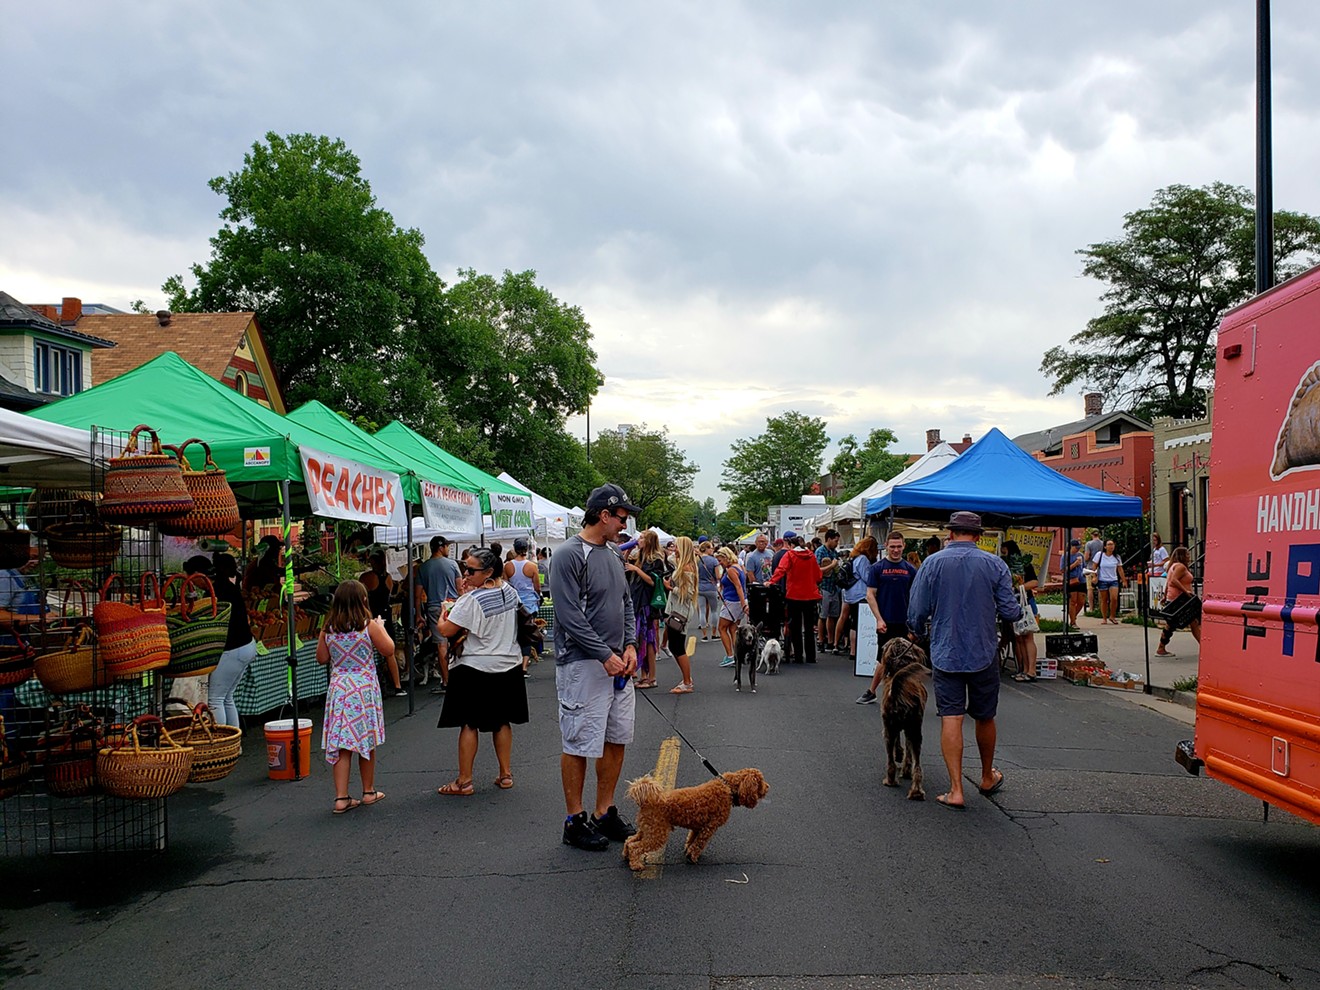 Clouds didn't deter the crowds at the Highlands Square Farmers' Market.